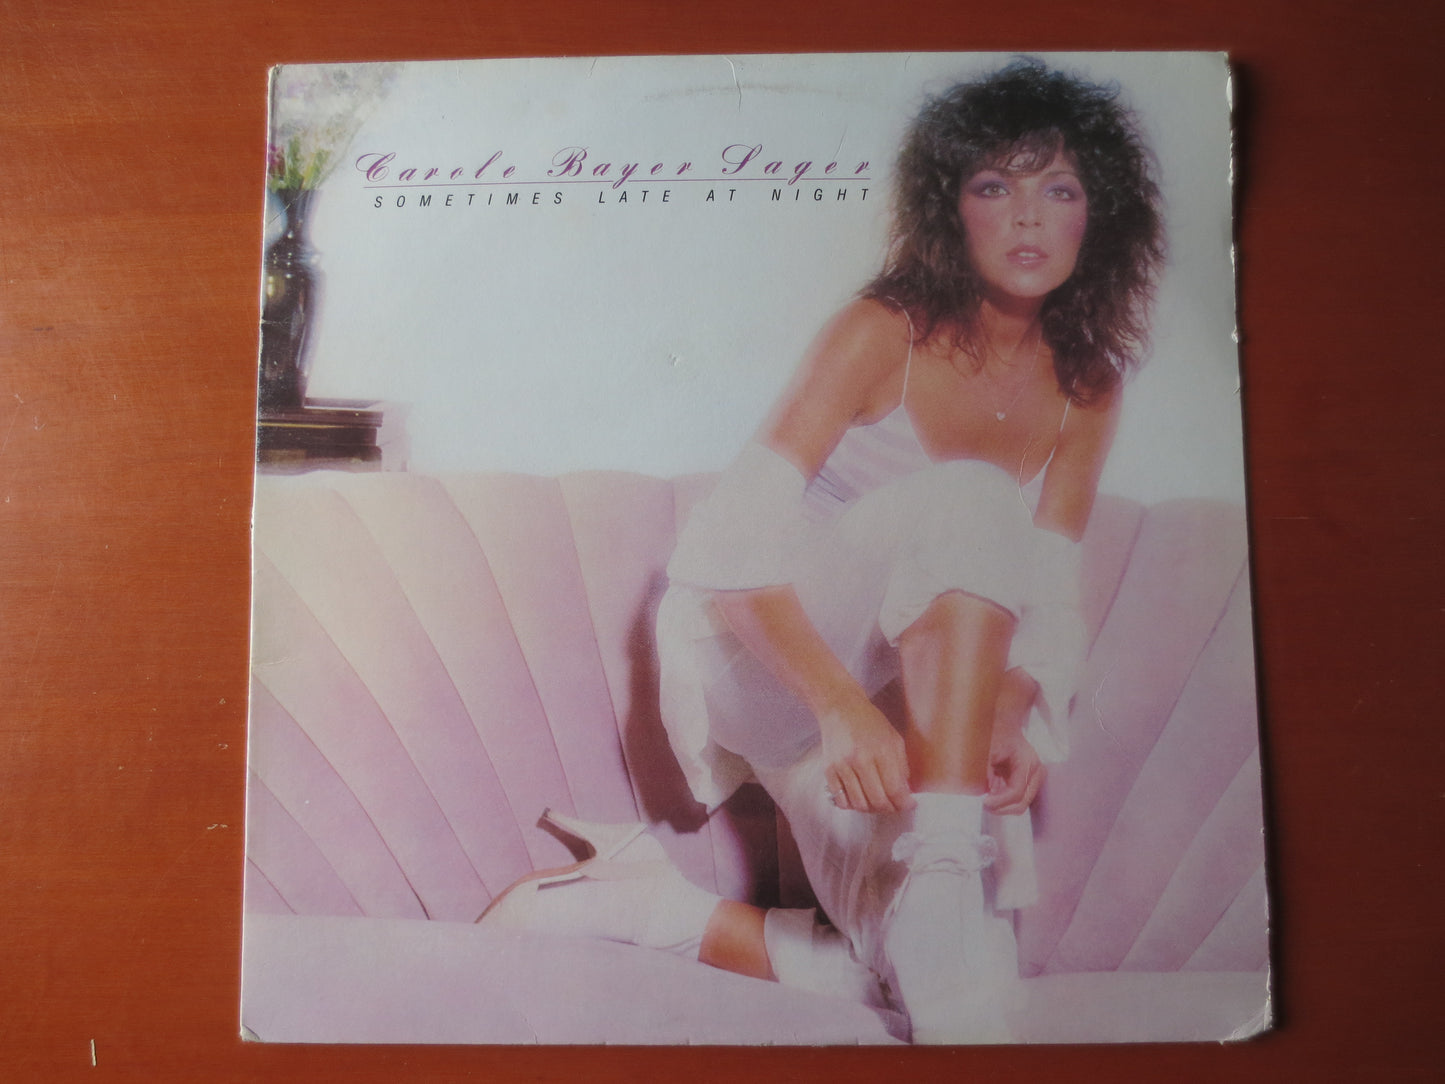 CAROLE BAYER SAGER, Sometimes Late At Night, Pop Records, Vintage Vinyl, Record Vinyl, Records, Vinyl Albums, 1981 Records